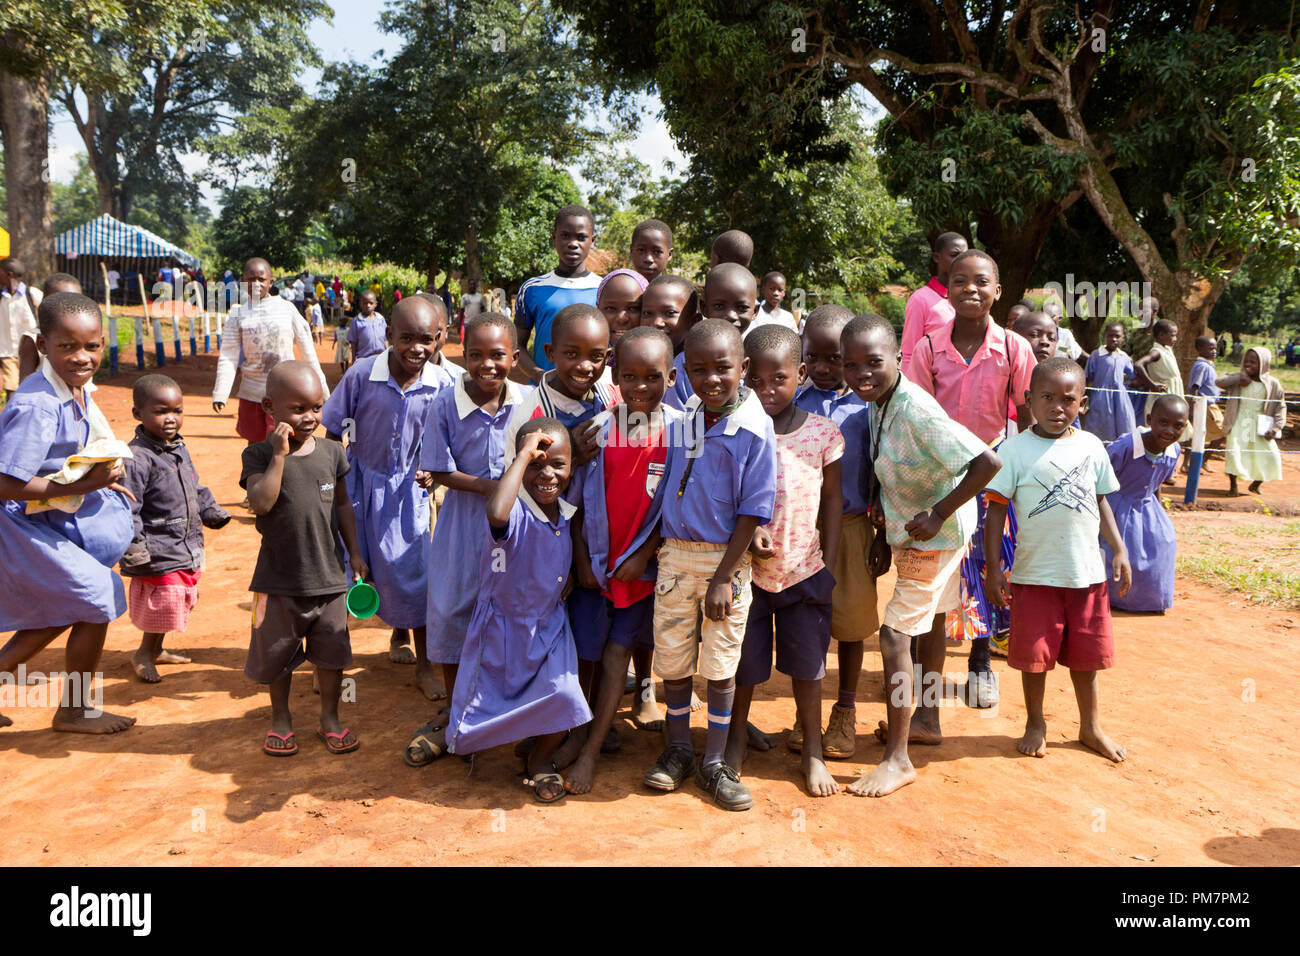 Uganda. June 30 2017. A group of happy mostly primary-school children smiling, laughing and waving. Stock Photo